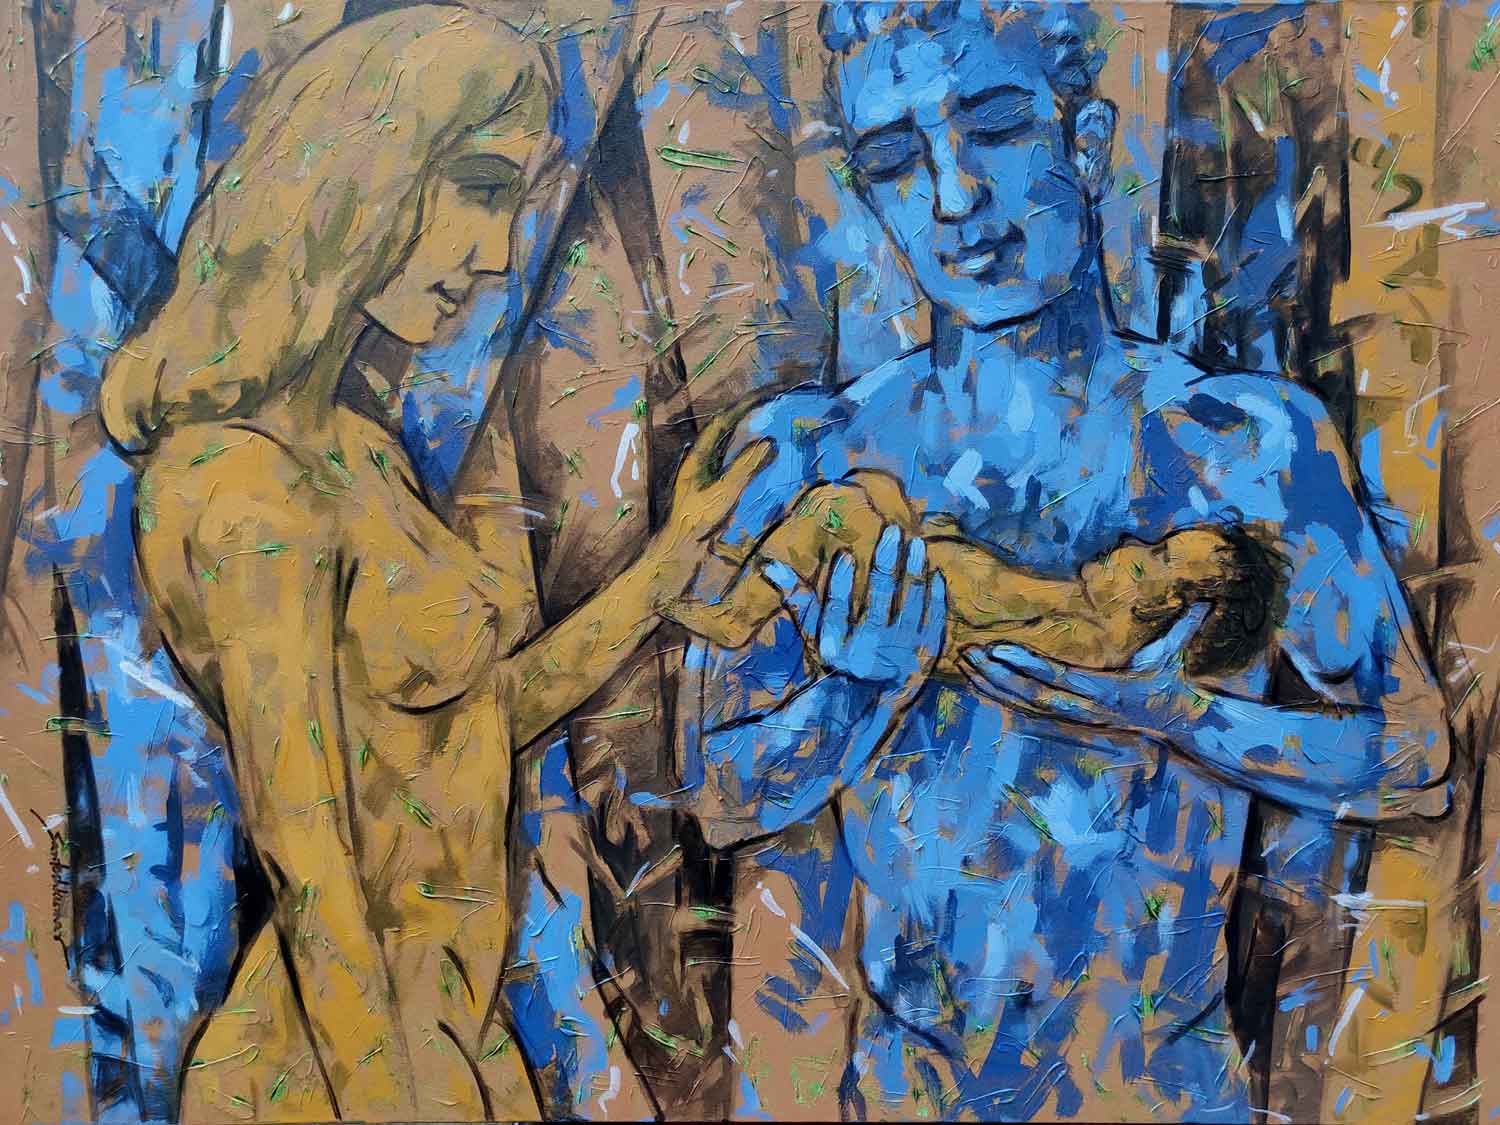 Figurative Painting with Acrylic on Canvas "Love-3" art by Santoshkumar Patil